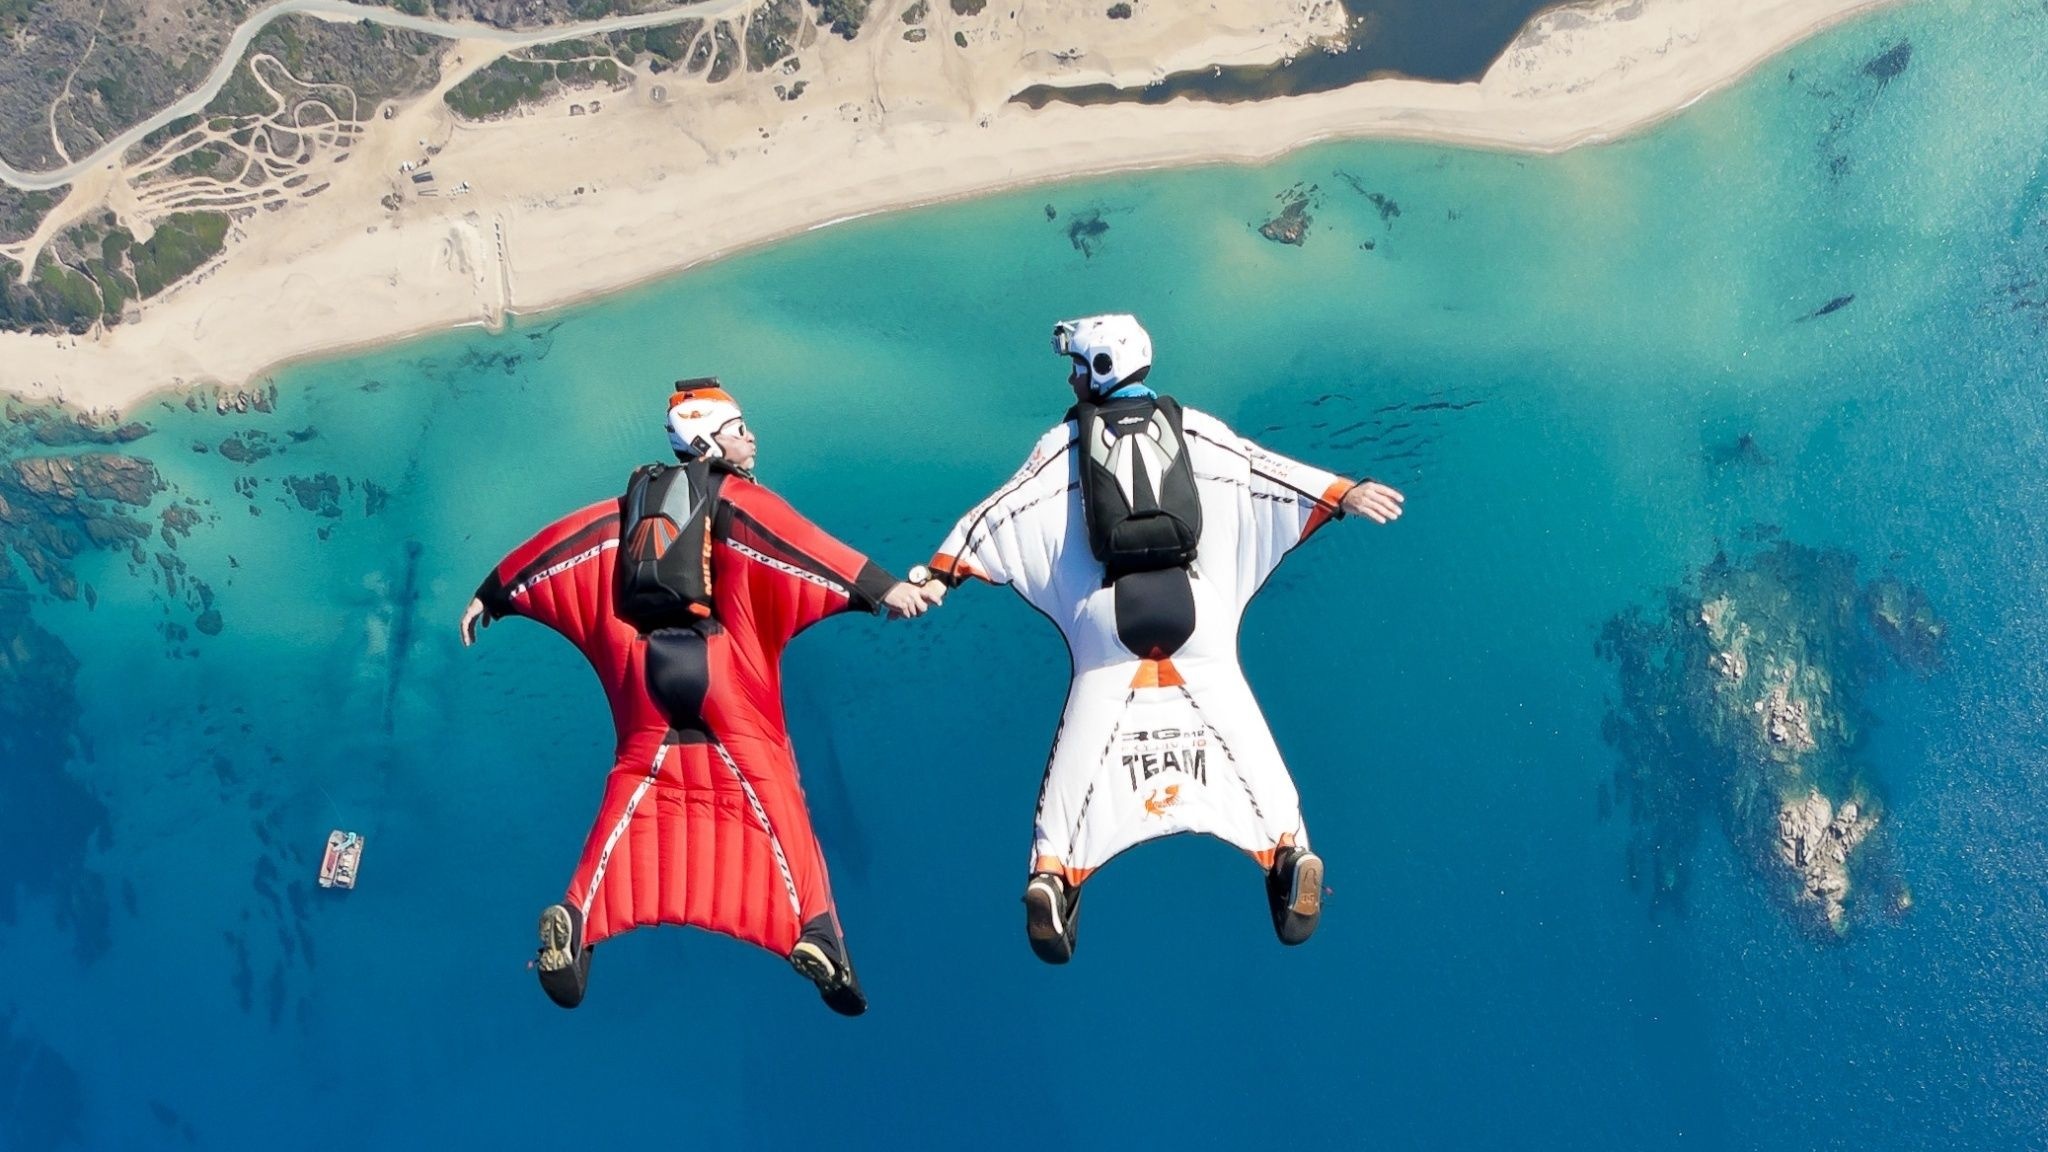 Wingsuit Flying: Tandem wingsuit skydiving, Extreme formations in the air, Windsports. 2050x1160 HD Wallpaper.